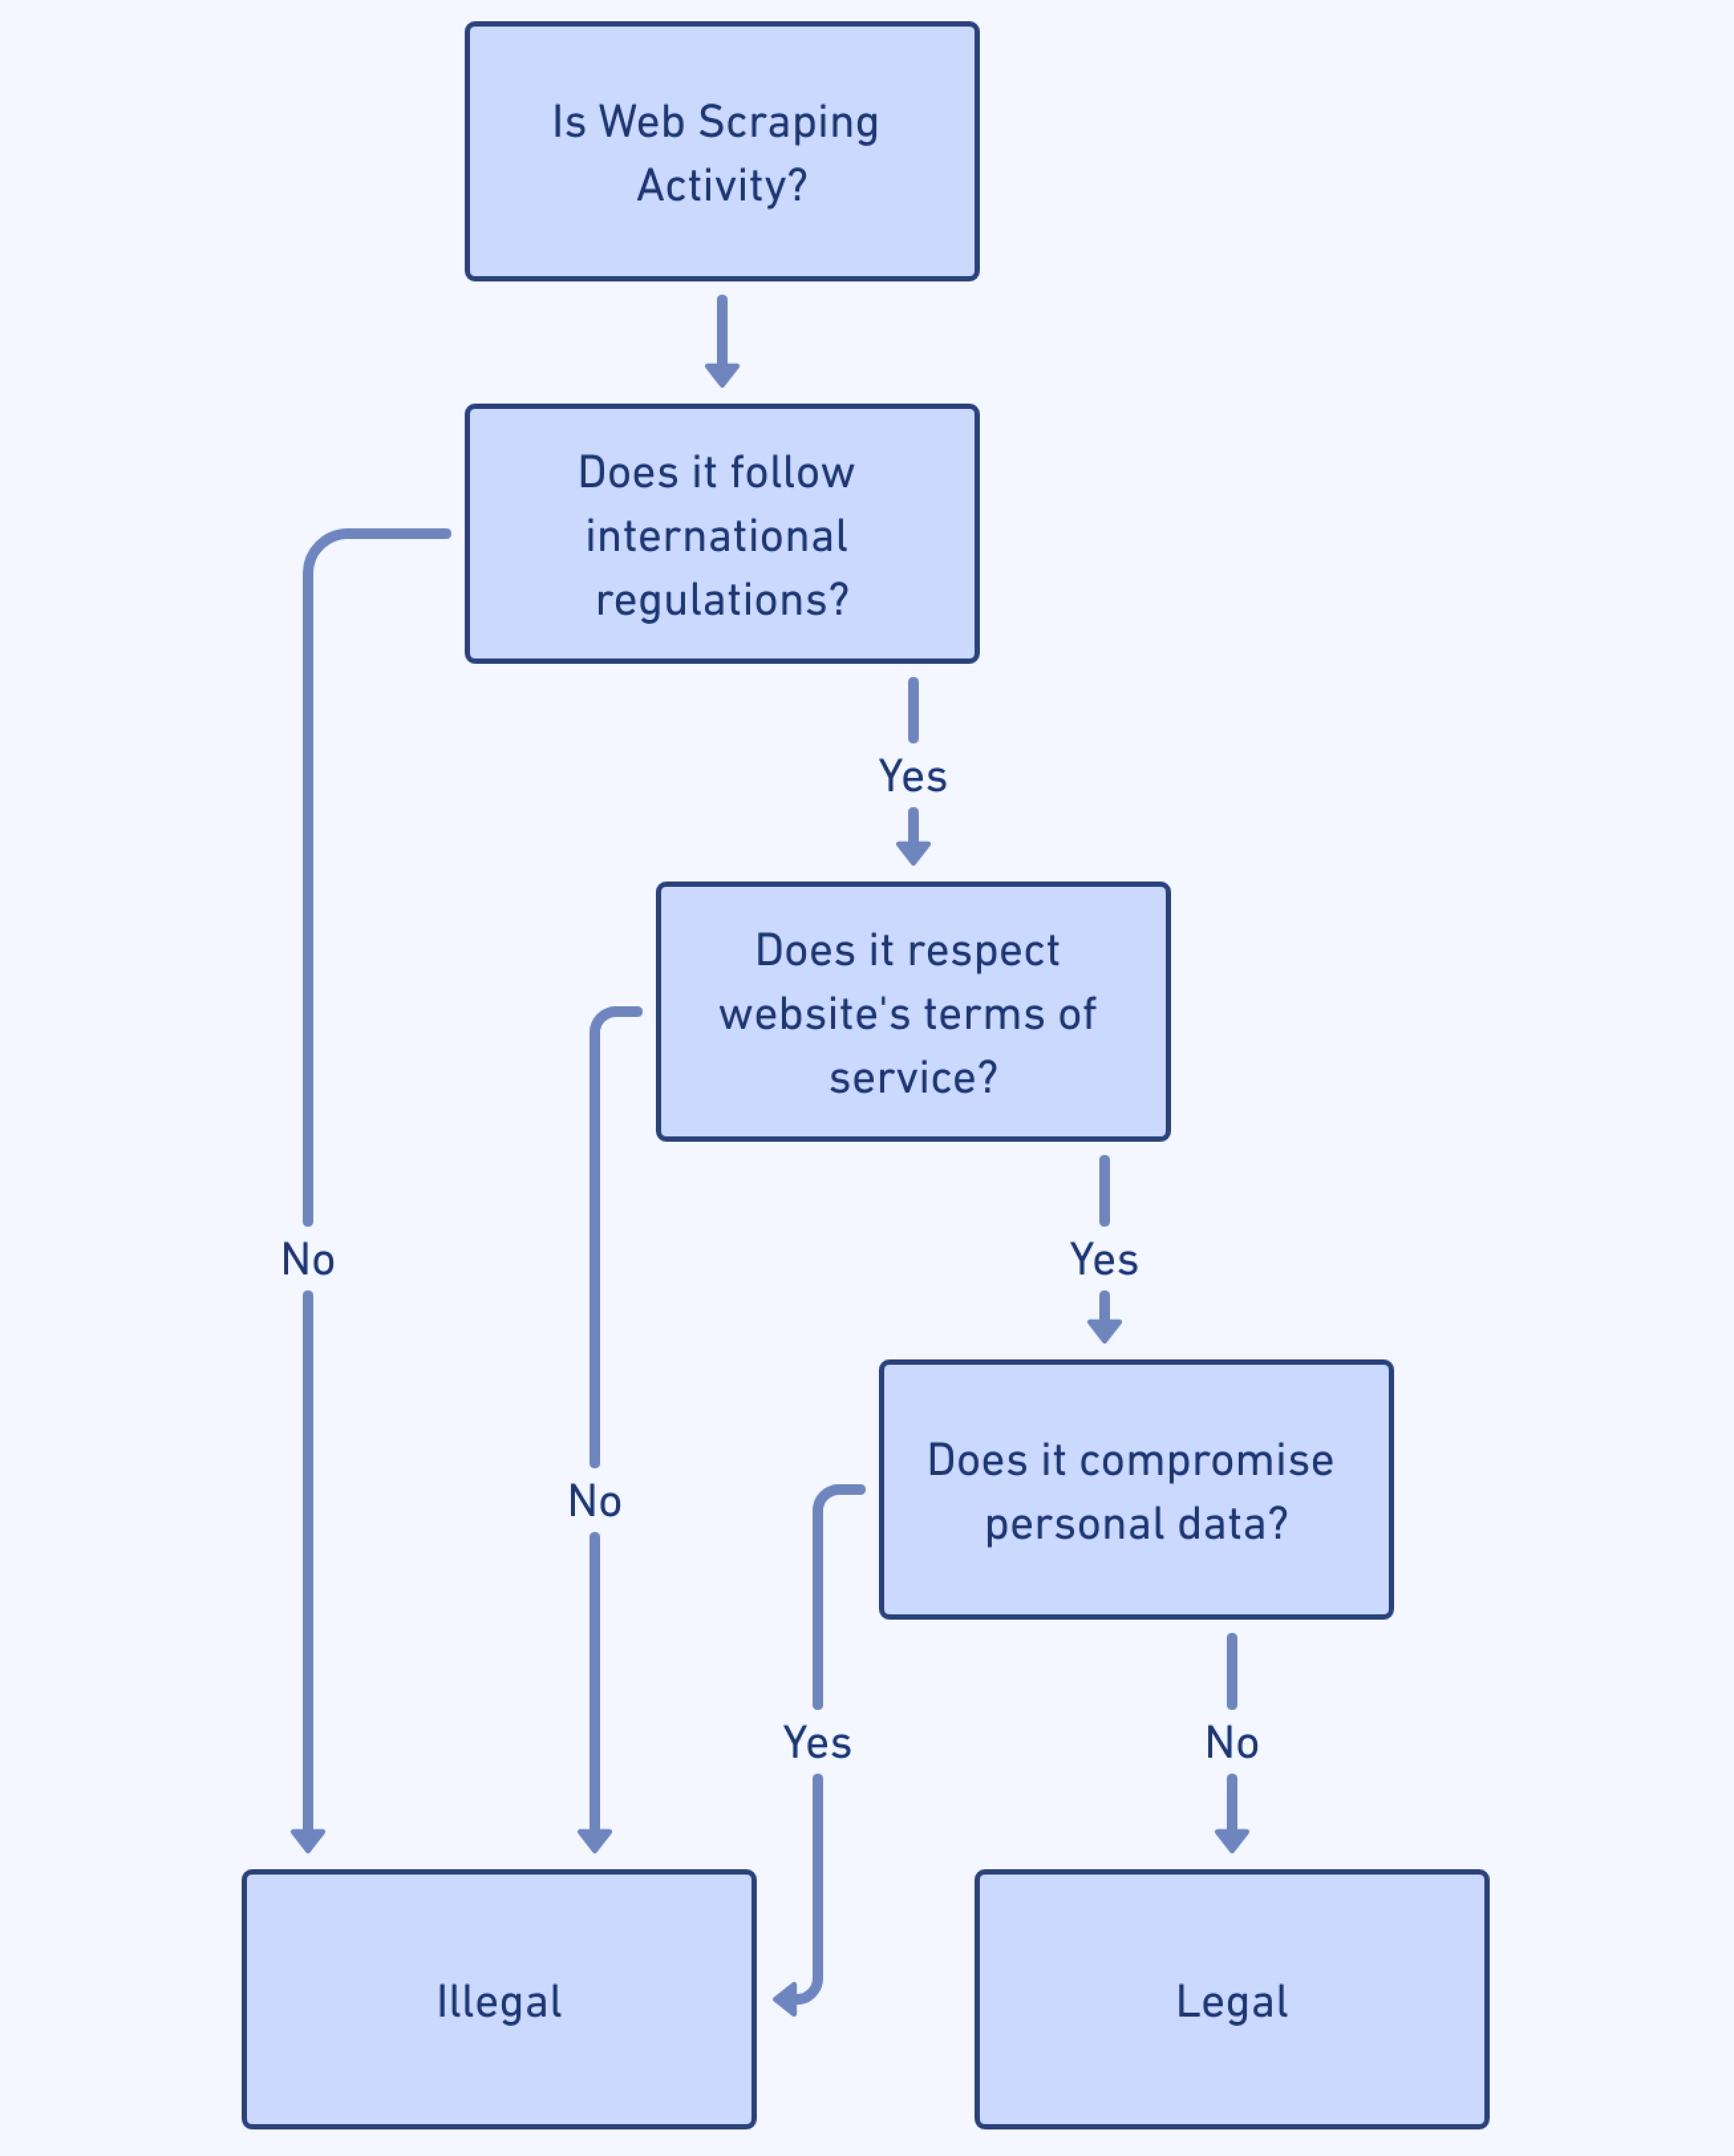 Flowchart illustrating the decision-making process to determine the legality of web scraping activities, considering international regulations, website's terms of service, and personal data compromise.